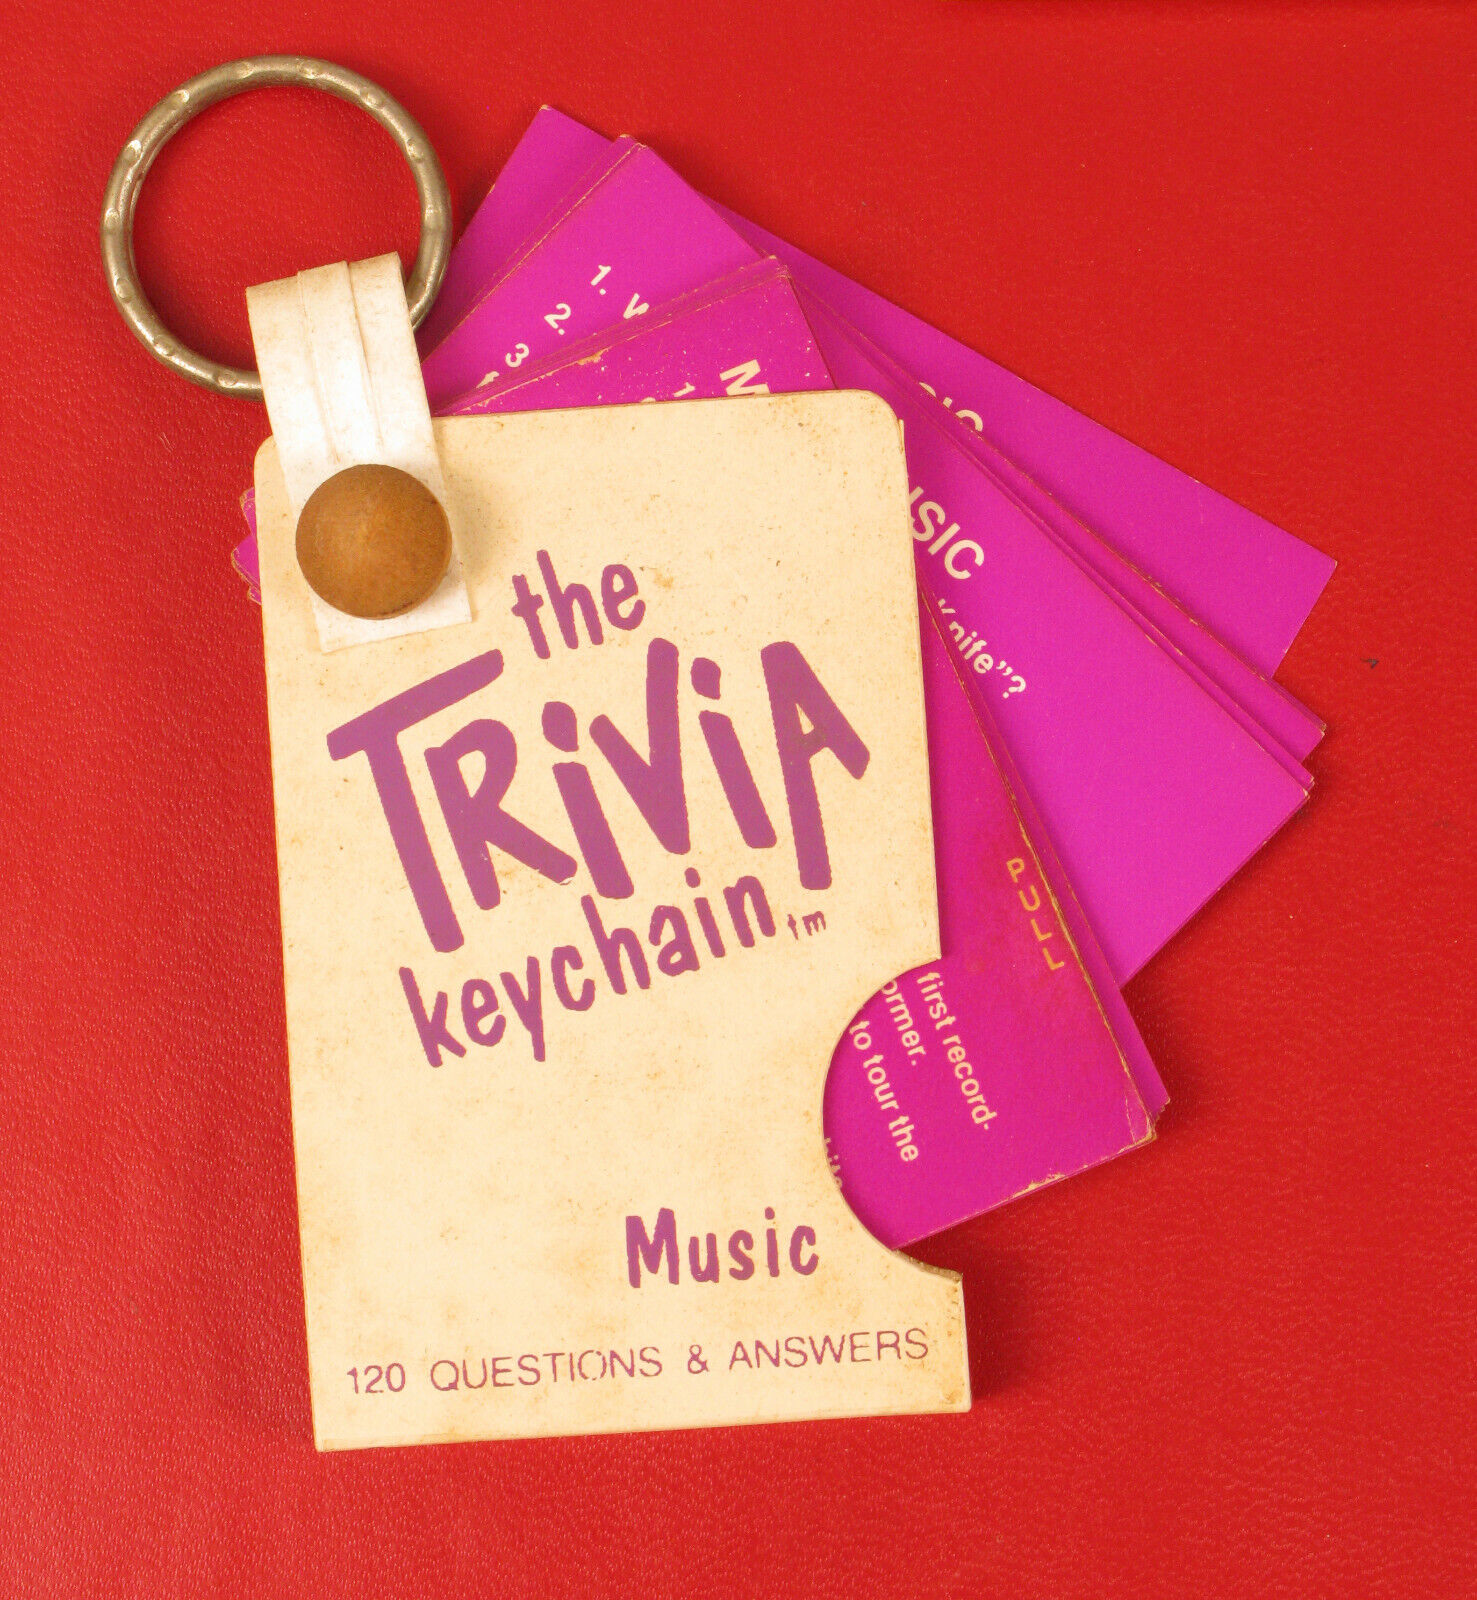 VINTAGE THE MUSIC TRIVIA KEY CHAIN 120 QUESTIONS AND ANSWERS FUN WOW 